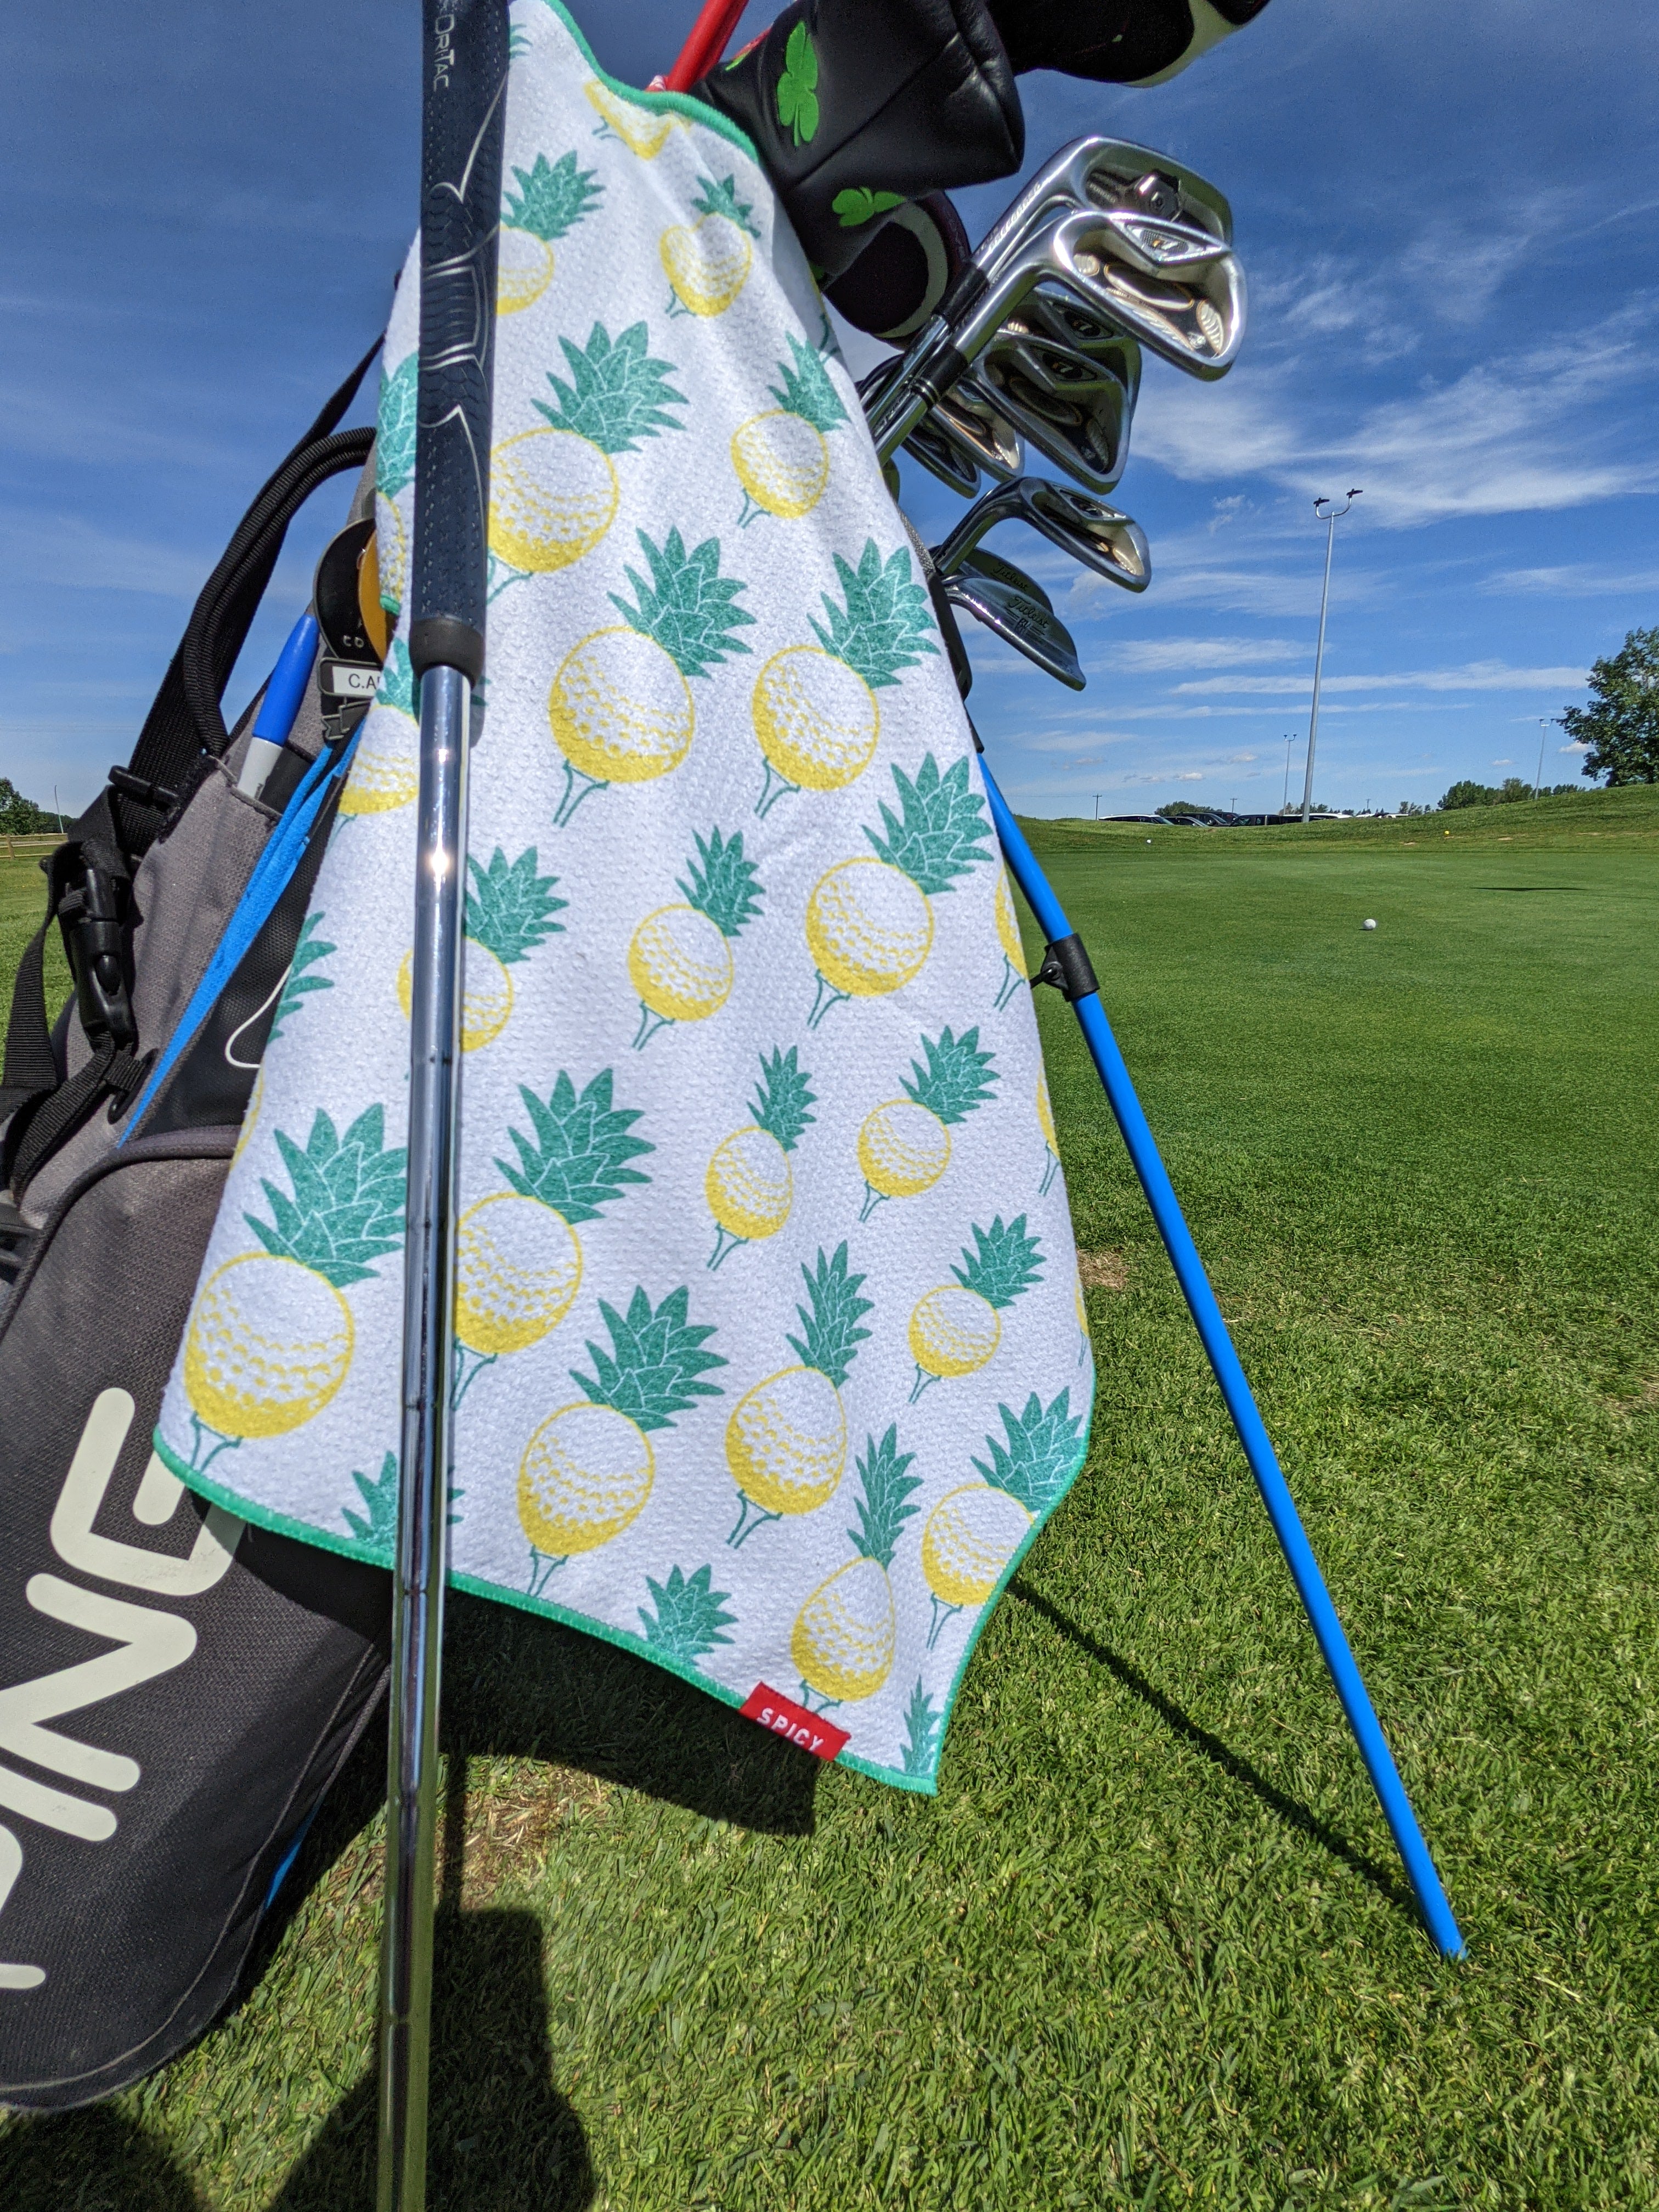 Pineapple Express - PLAYERS Towel